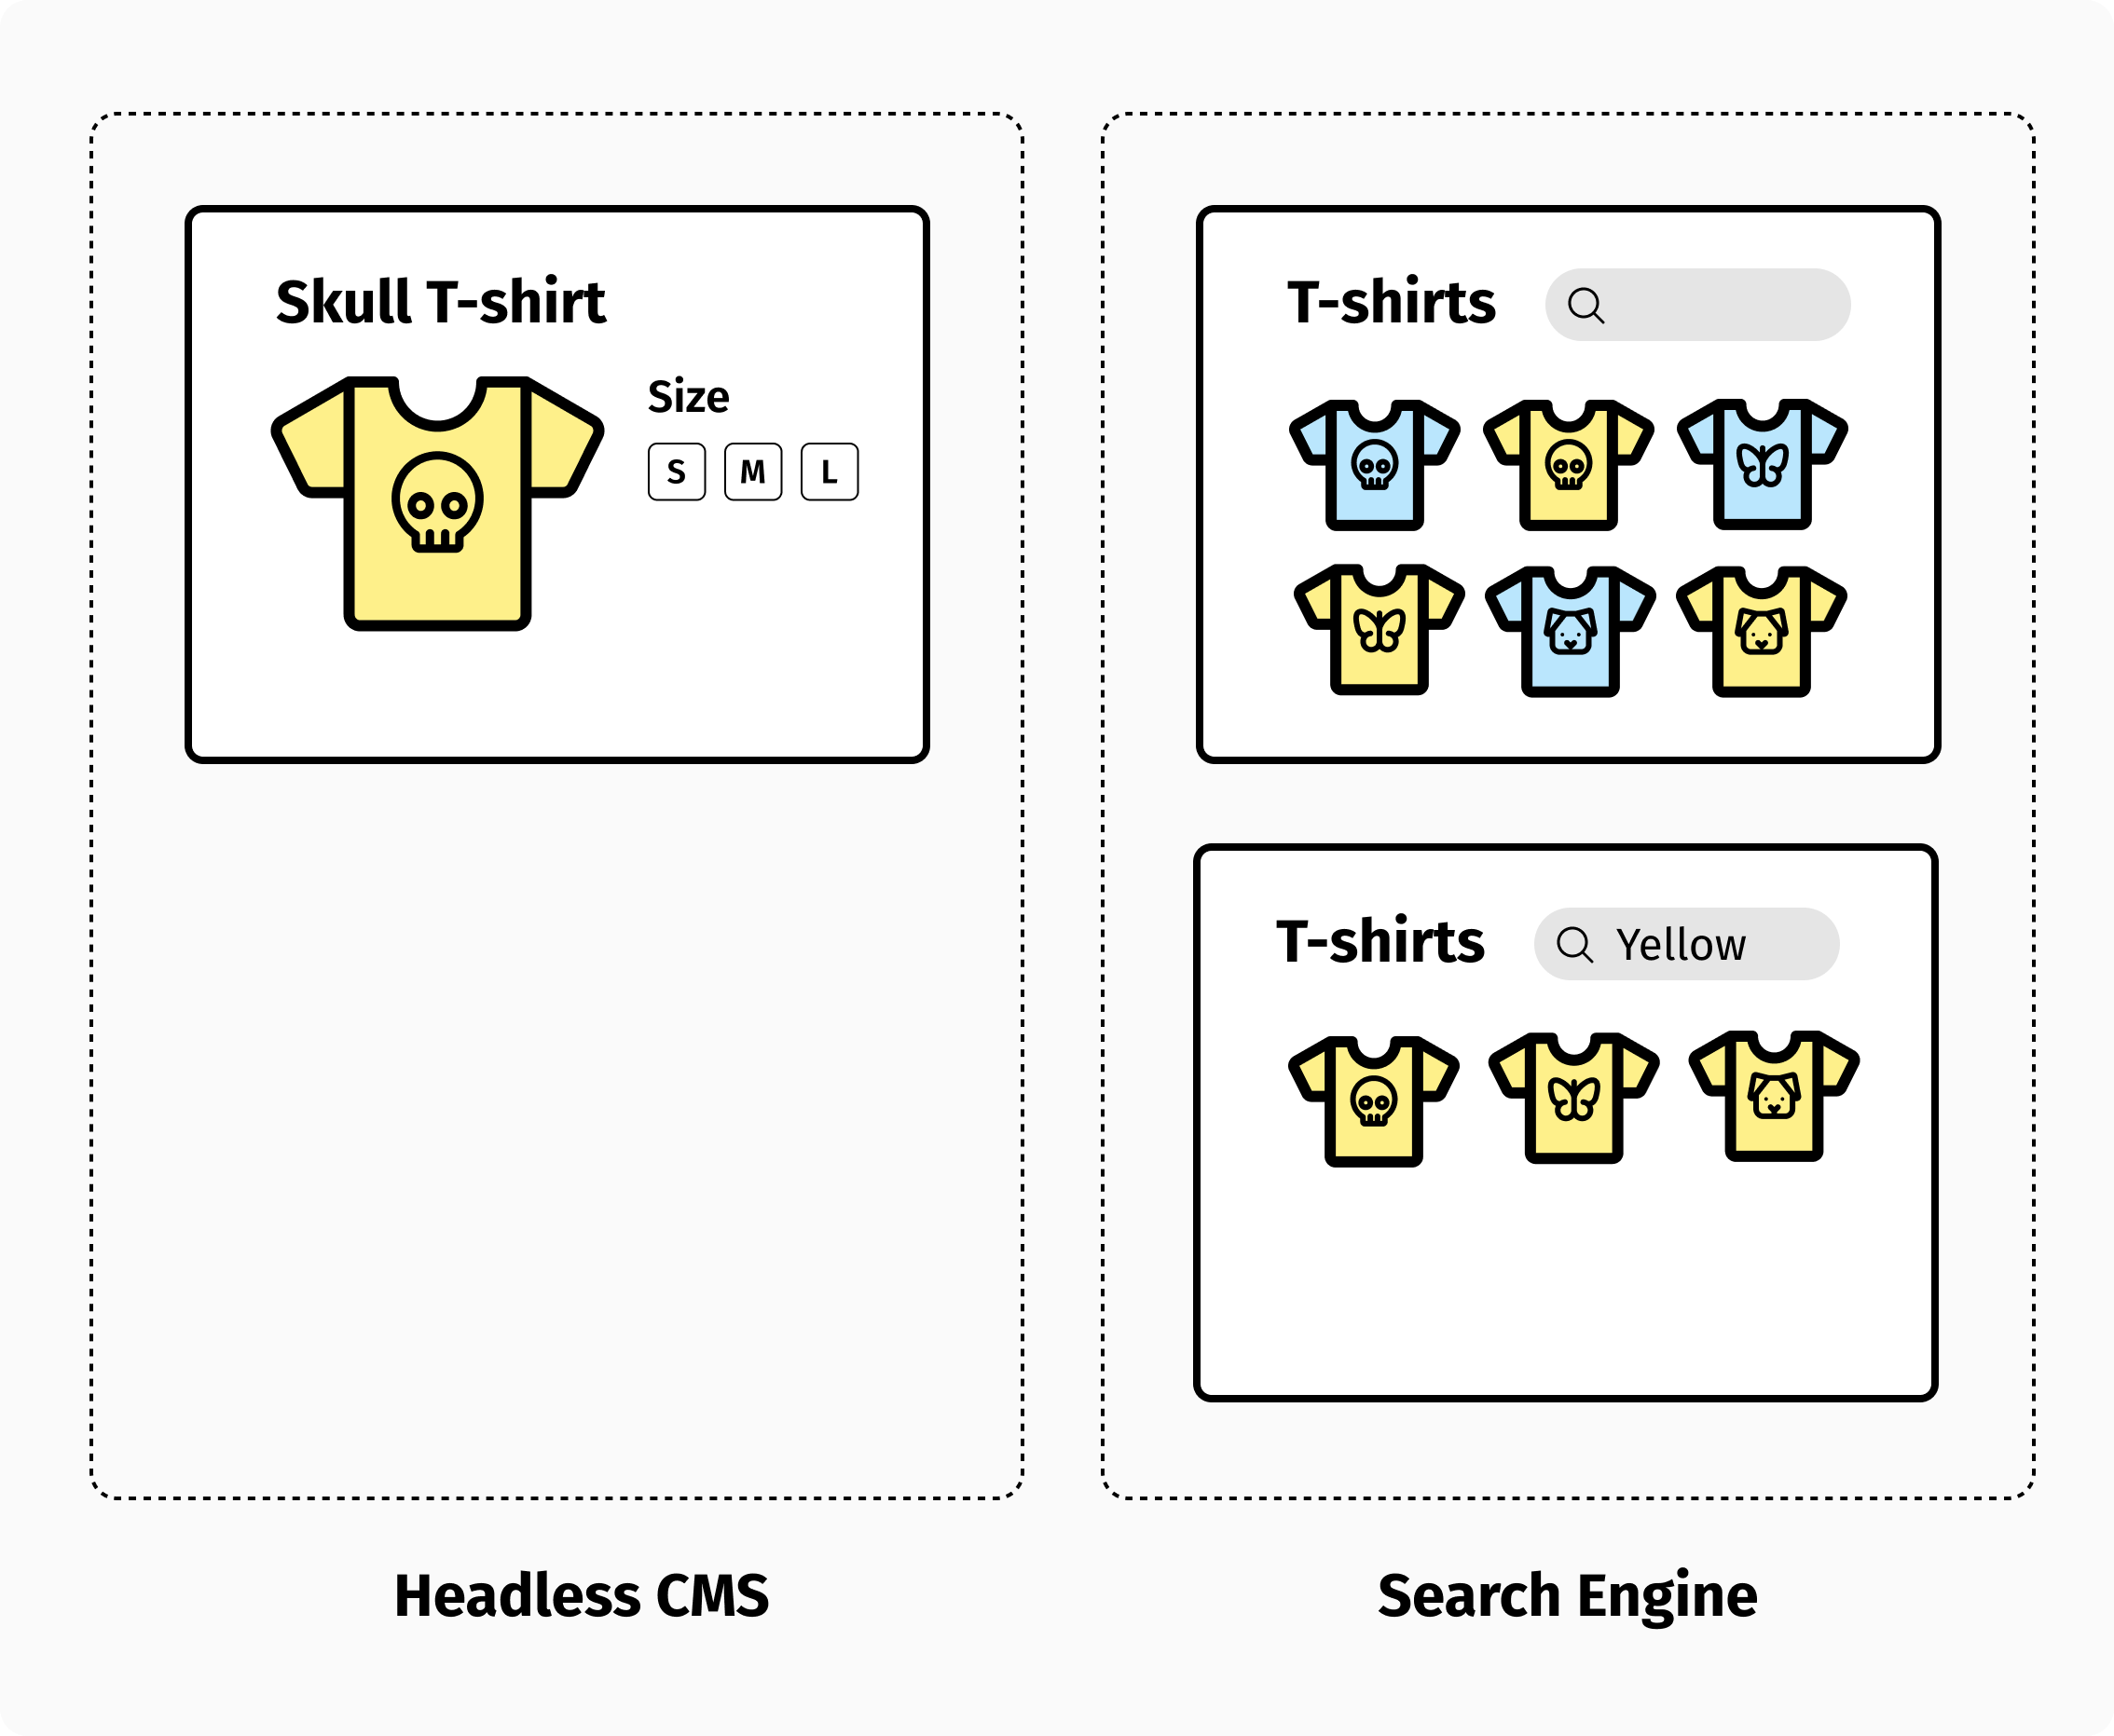 Only product pages are generated by the headless CMS, and all product listing pages are dynamically provided by the search engine.